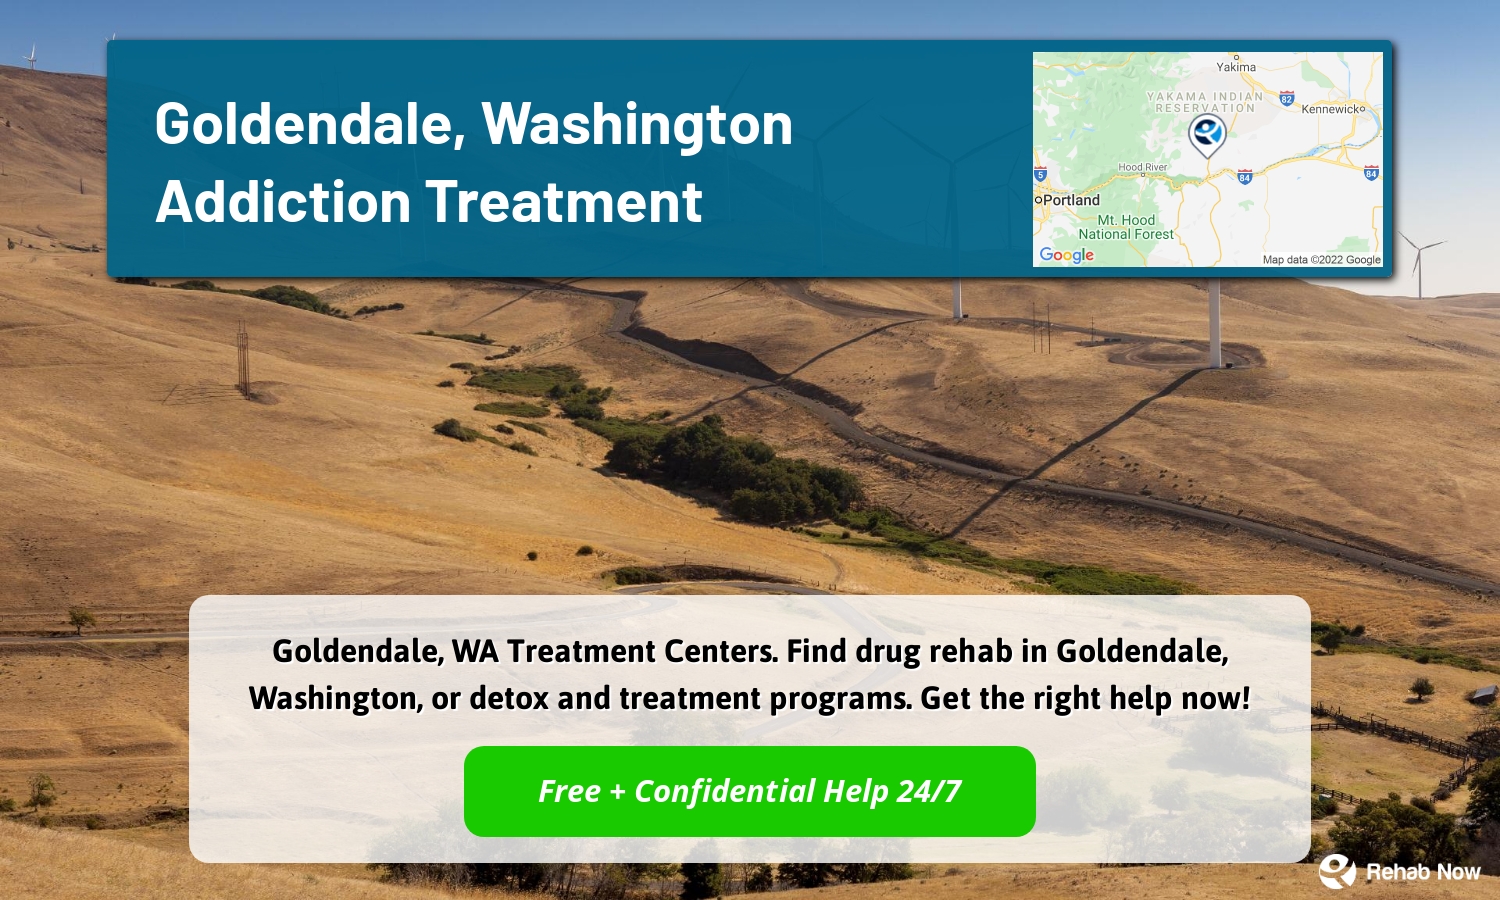 Goldendale, WA Treatment Centers. Find drug rehab in Goldendale, Washington, or detox and treatment programs. Get the right help now!